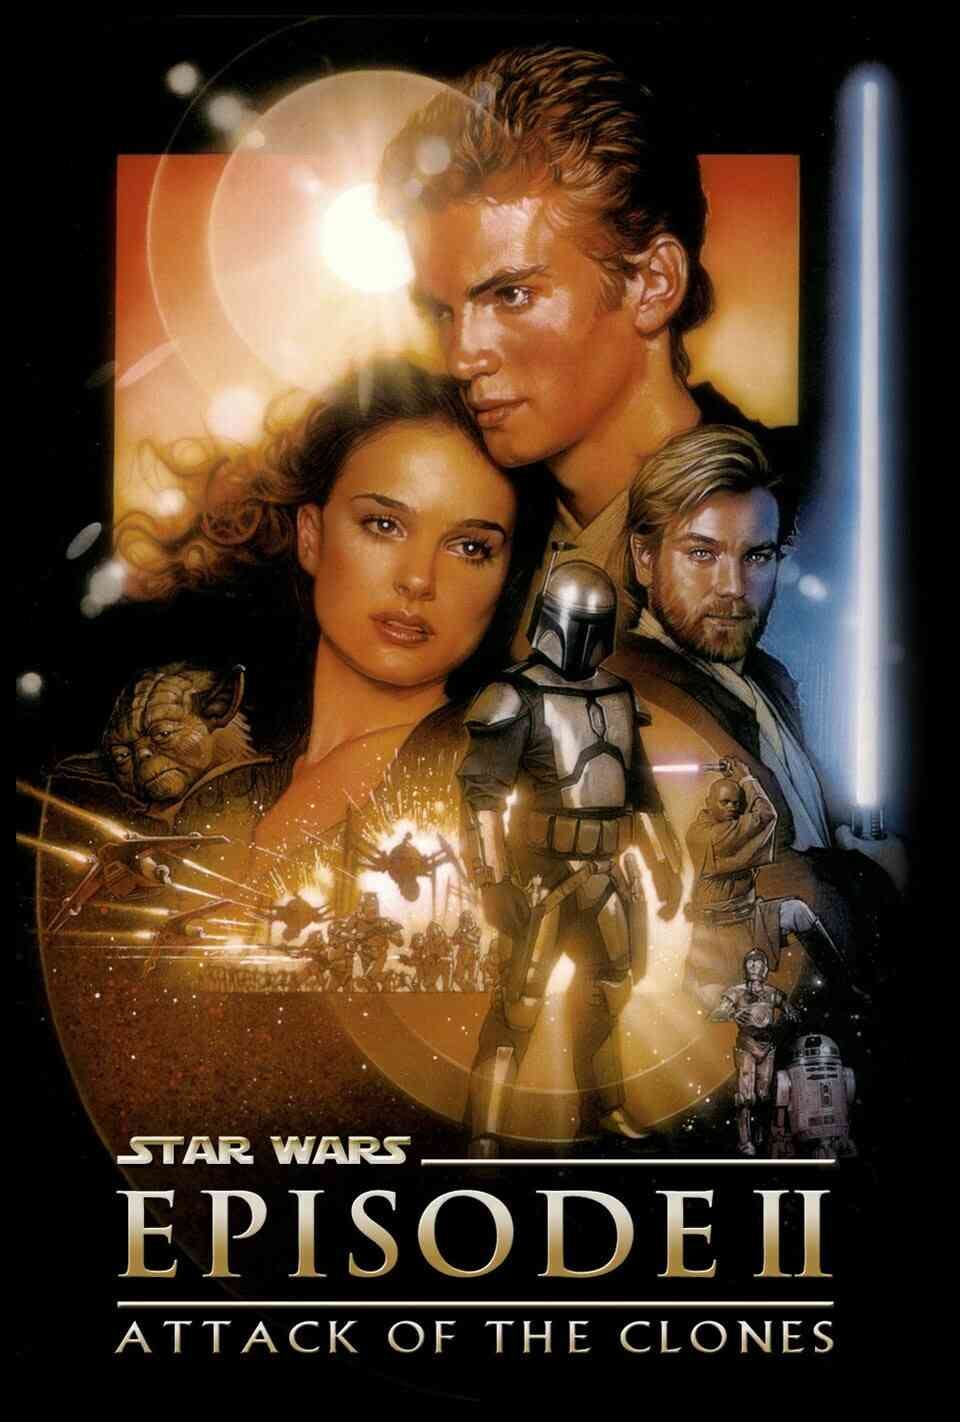 Read Episode II - Attack of the Clones screenplay.